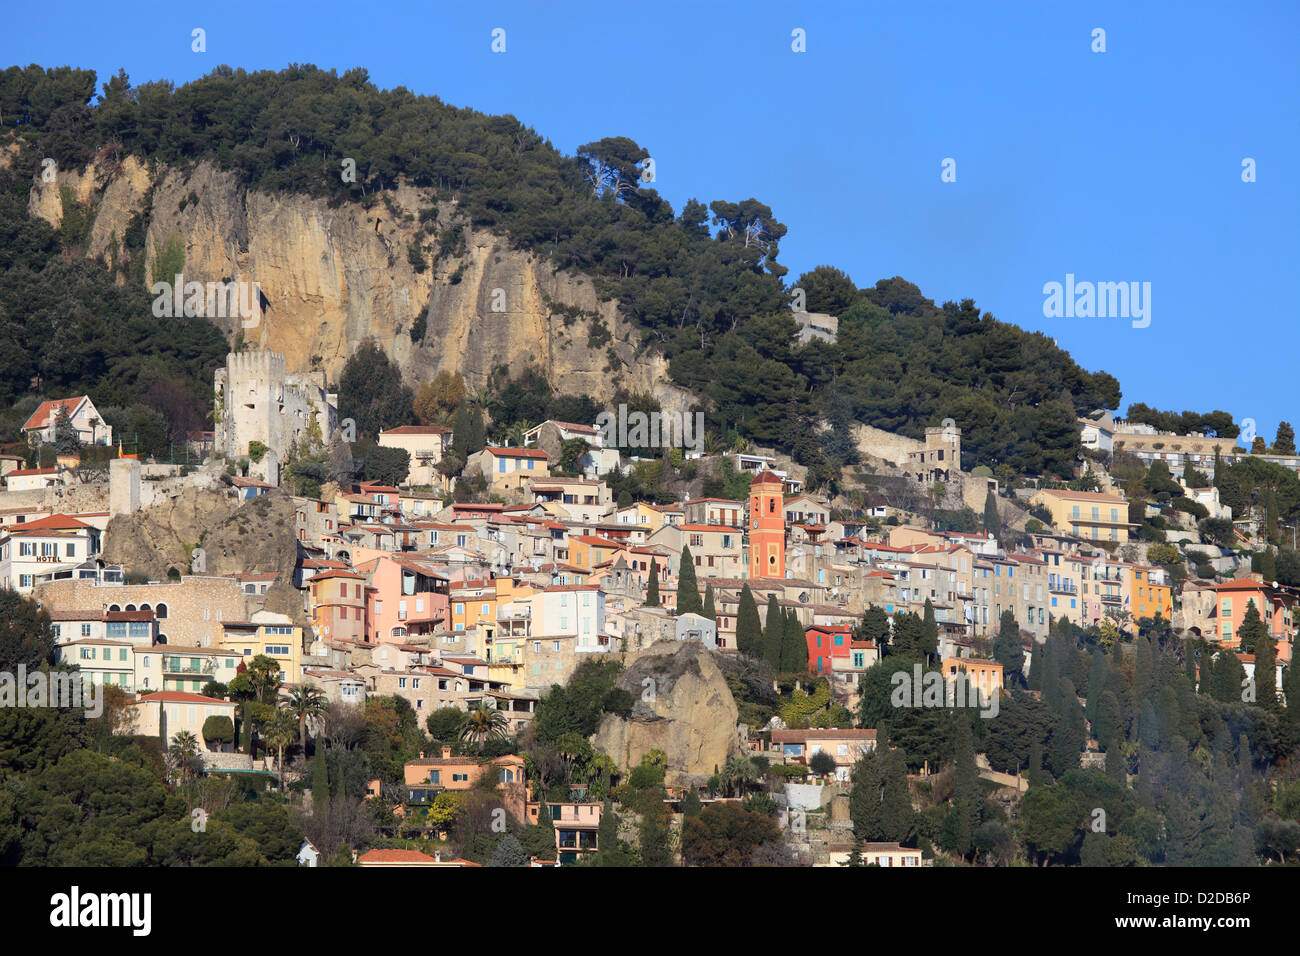 The medieval perched village of Roquebrune Stock Photo